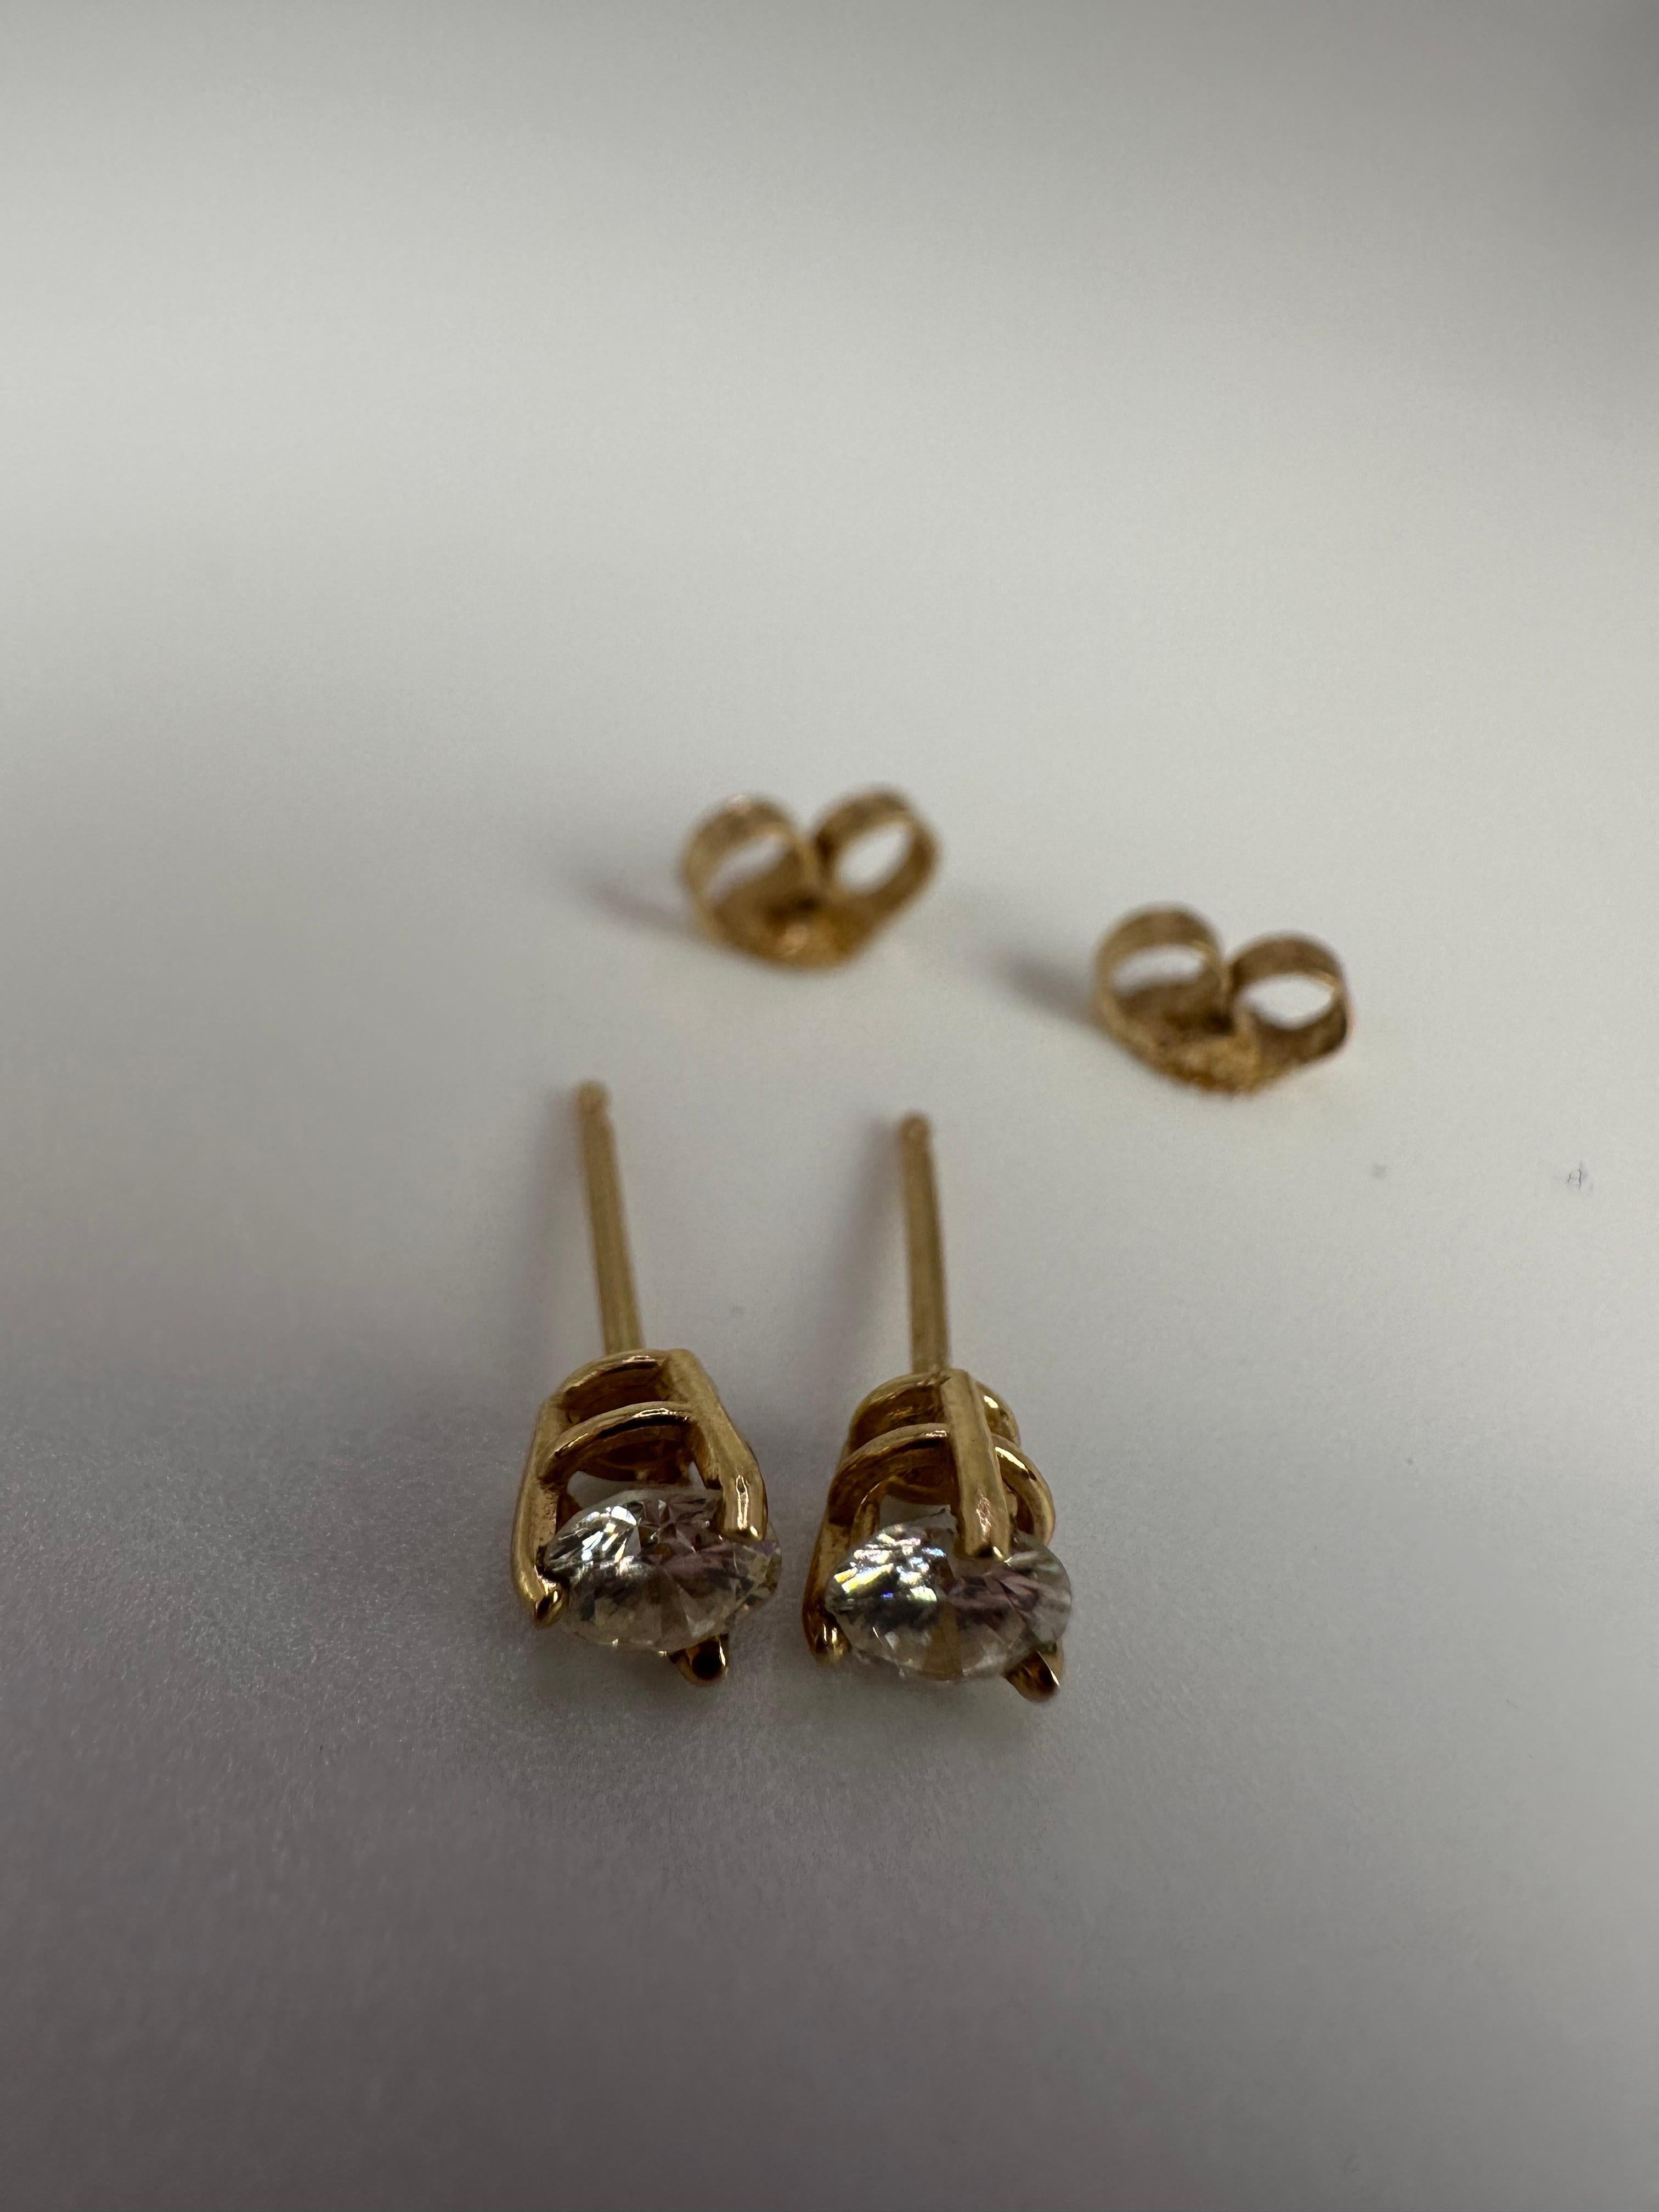 Beautiful diamond stud earrings in 14KT yellow gold.

GOLD: 14KT gold
NATURAL DIAMOND(S)
Clarity/Color: SI/J
Carat:0.46ct
Cut:Round Brilliant
Grams:0.46
Item#: 150-000163MPT

WHAT YOU GET AT STAMPAR JEWELERS:
Stampar Jewelers, located in the heart